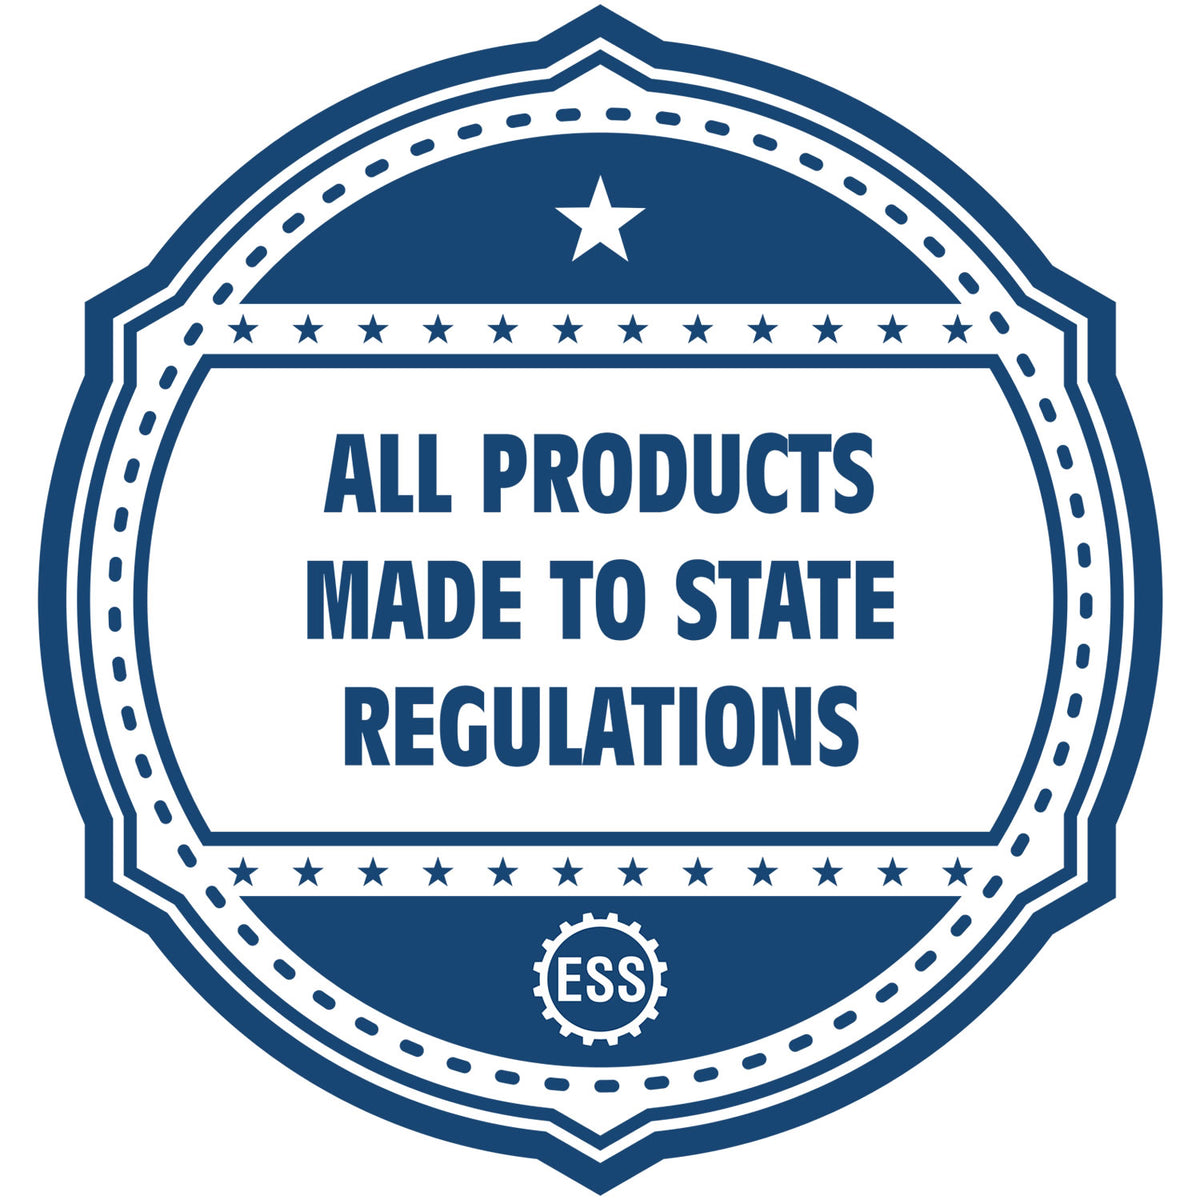 An icon or badge element for the PSI Guam Notary Stamp showing that this product is made in compliance with state regulations.